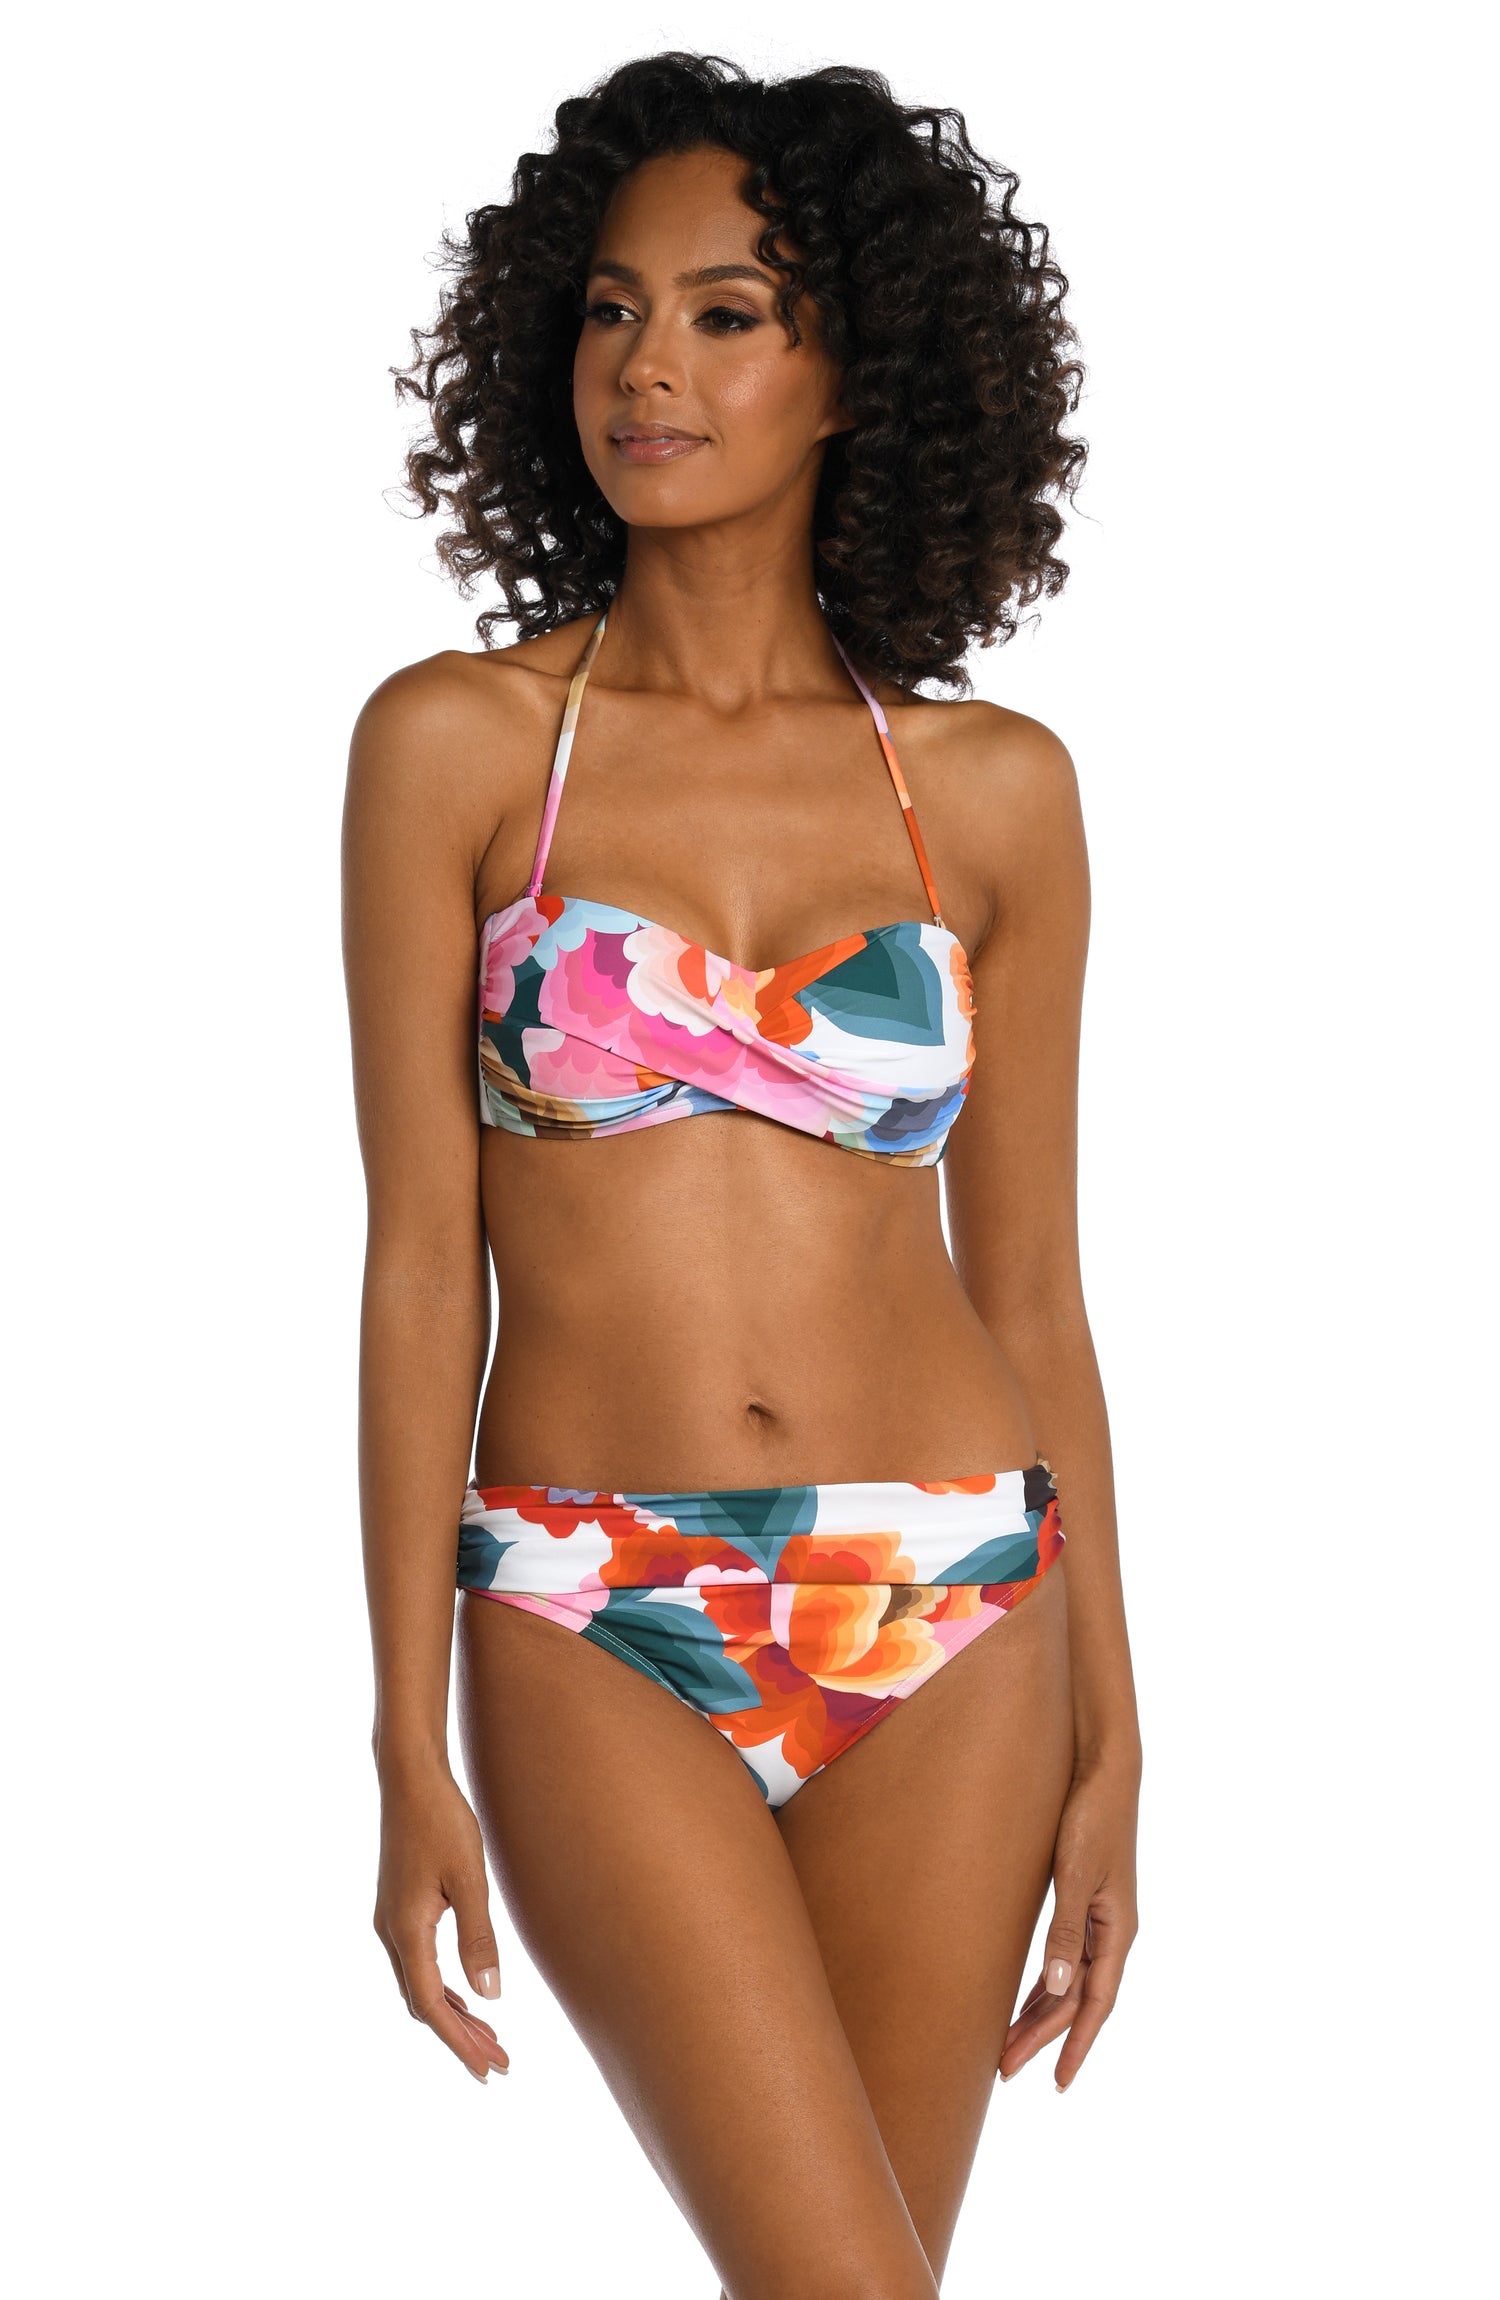 Model is wearing a multi colored floral printed bandeau top from our Floral Rhythm collection!